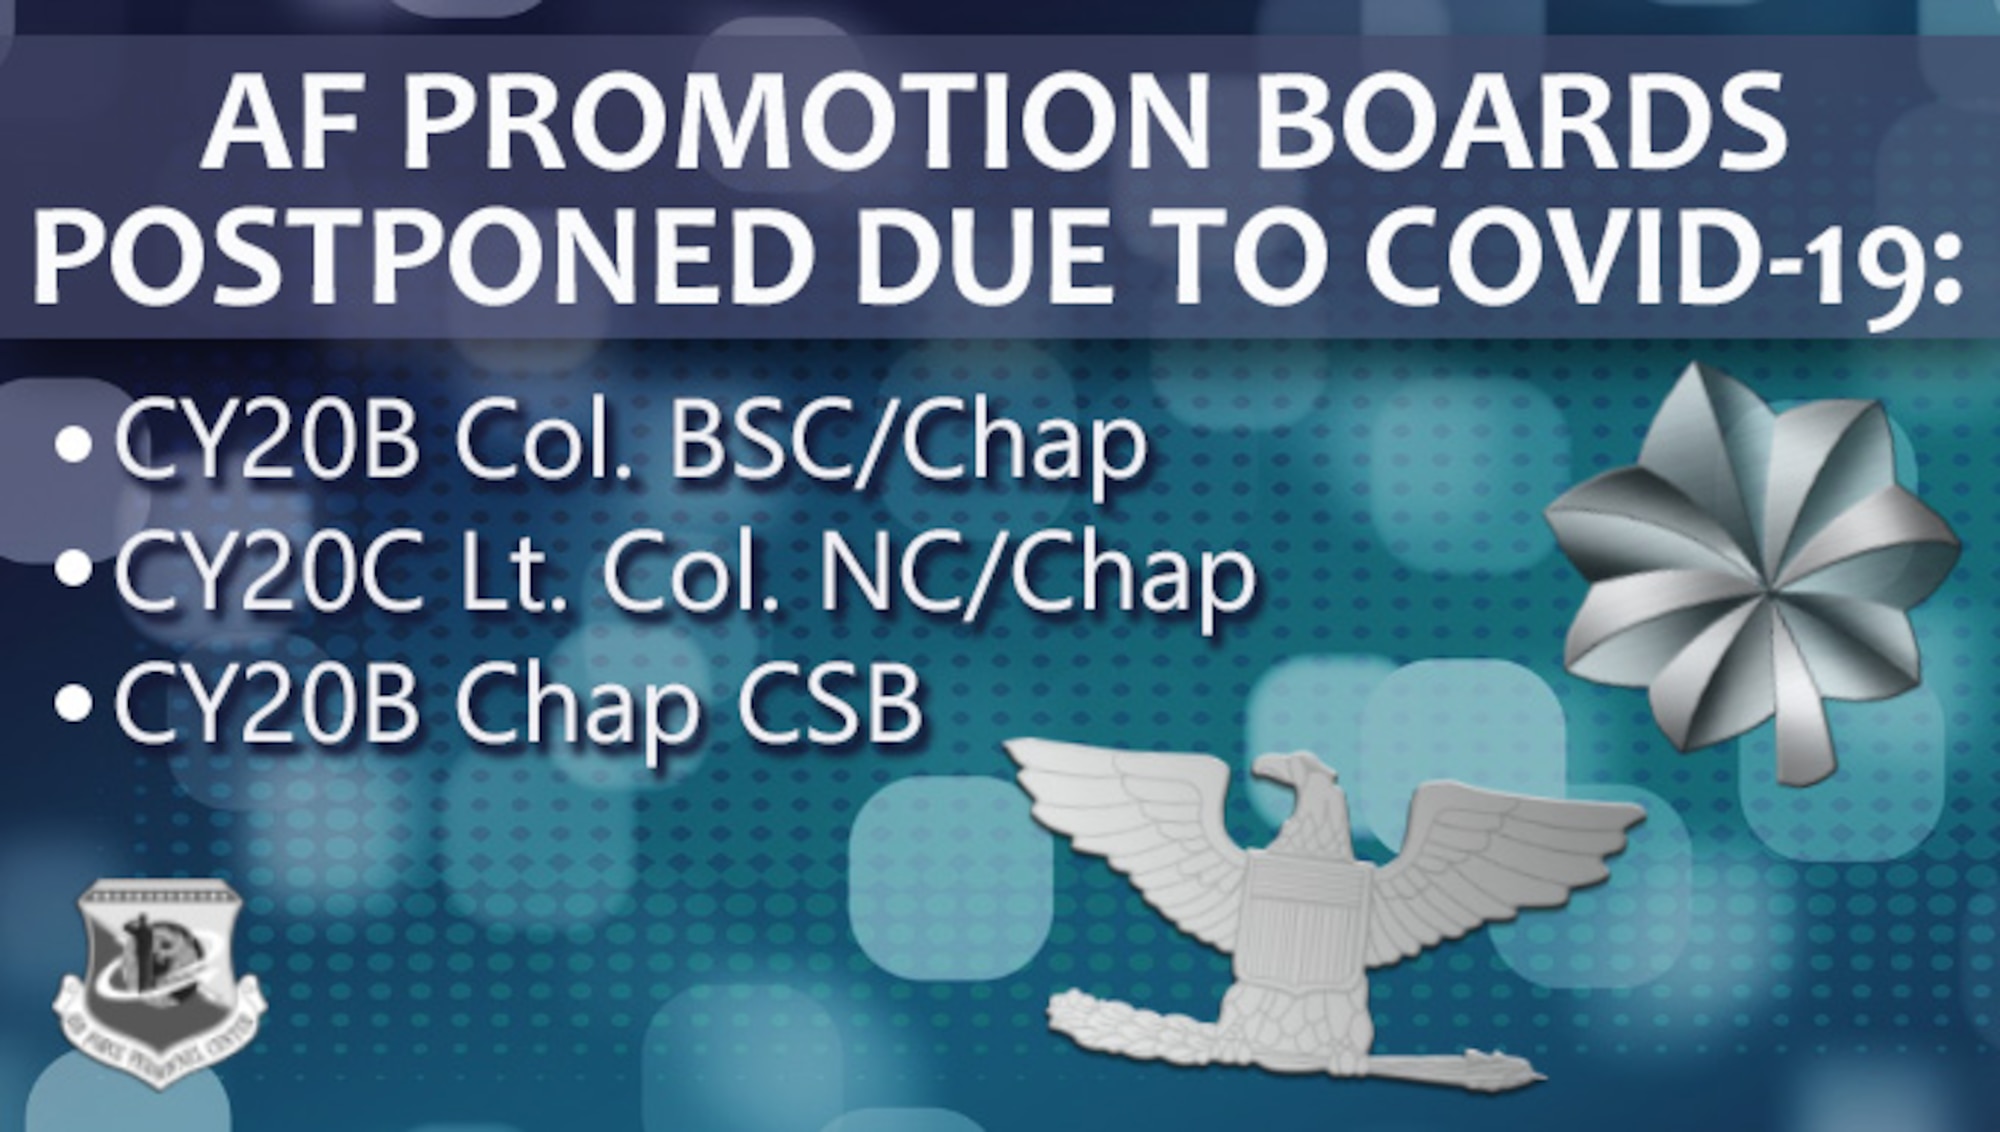 Graphic depicting Air Force Promotion Boards postponed due to COVID-19: CY20B Col. BSC/Chap, CY20C Lt. Col. NC/Chap, CY20B Chap CSB.